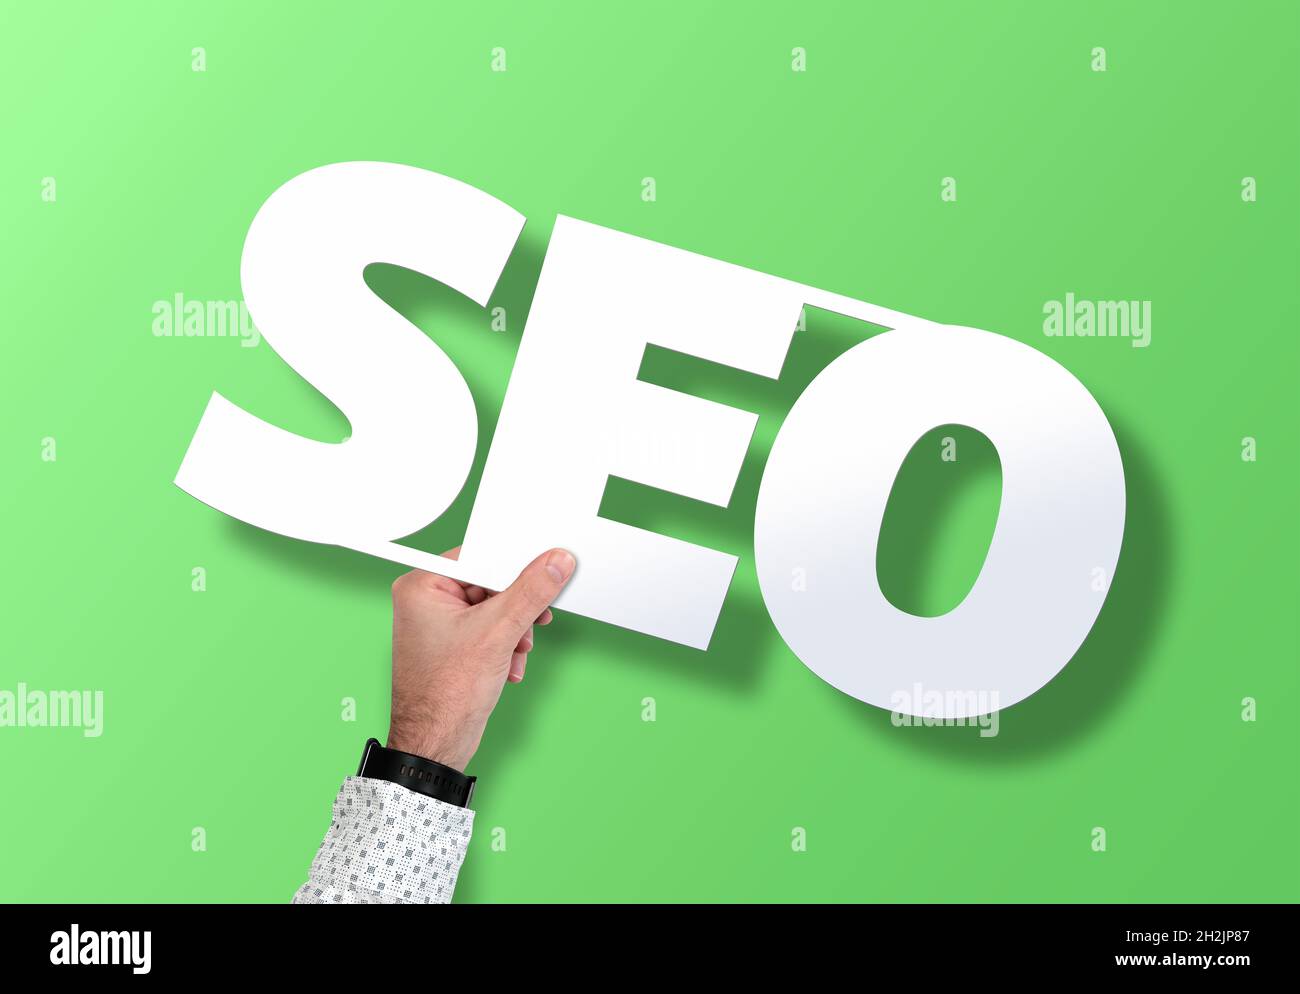 hand holding SEO sign against green background, search engine optimization concept Stock Photo